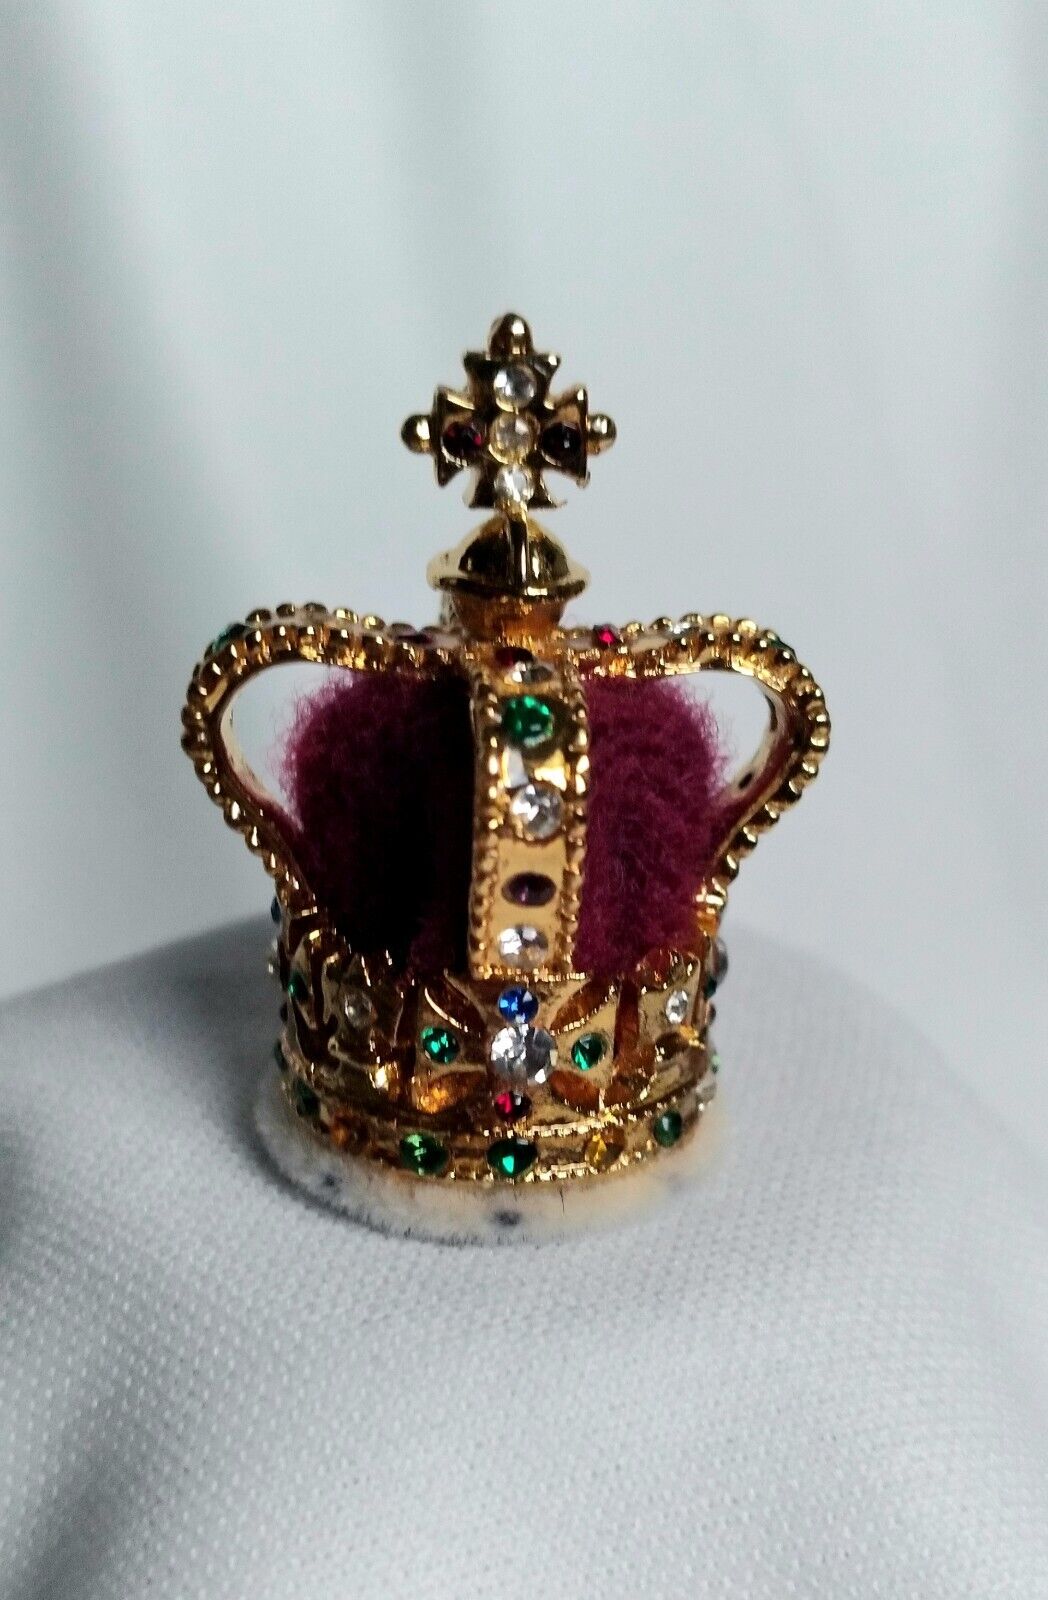 Vintage St. Edward's Crown Miniature Replica Jewel Royal House Collection In Box